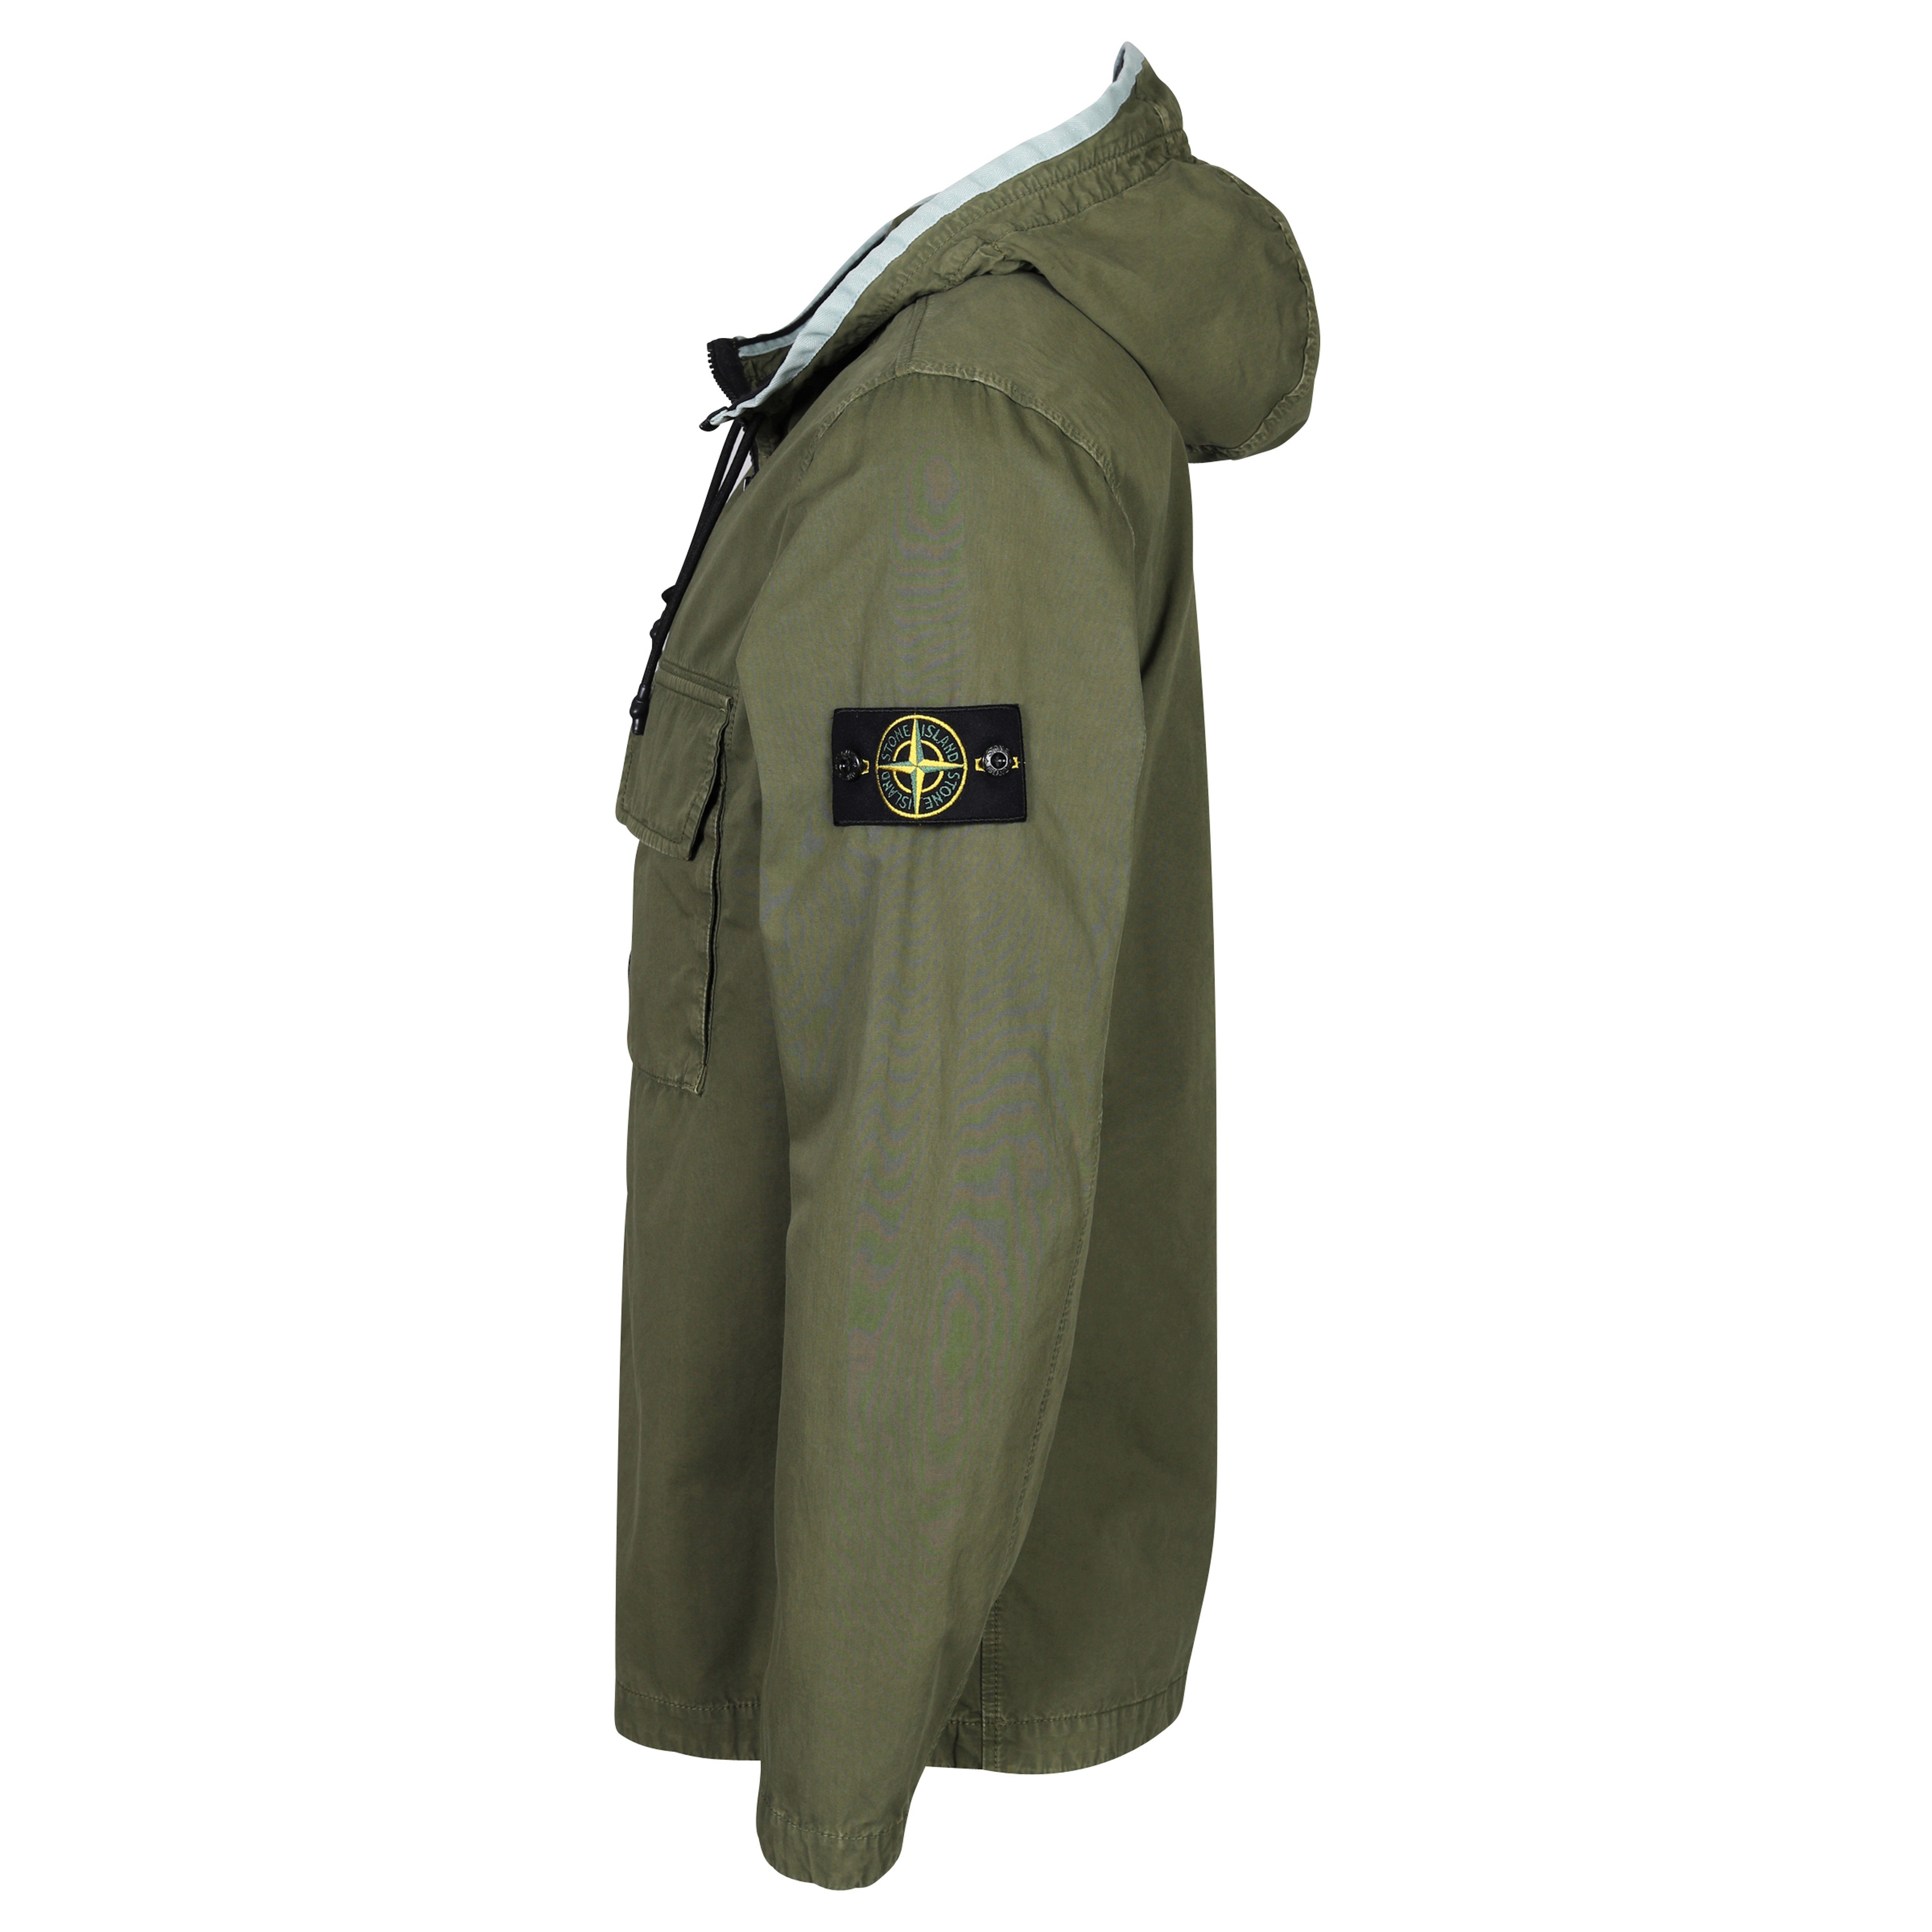 Stone Island Cotton Hooded Overshirt in Washed Olive XL